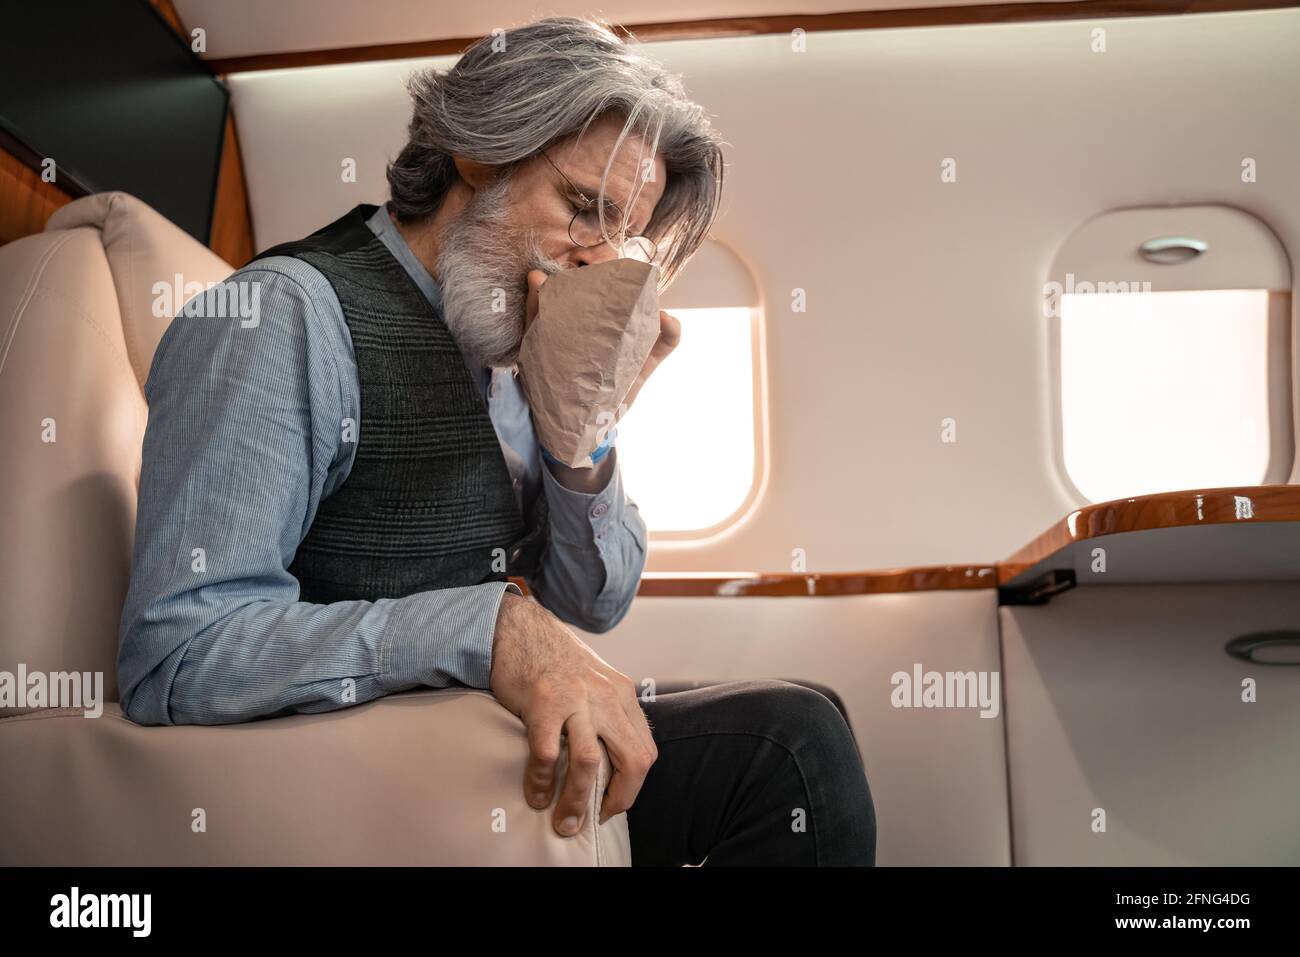 Mature man breathing in air sickness bag in private jet Stock Photo